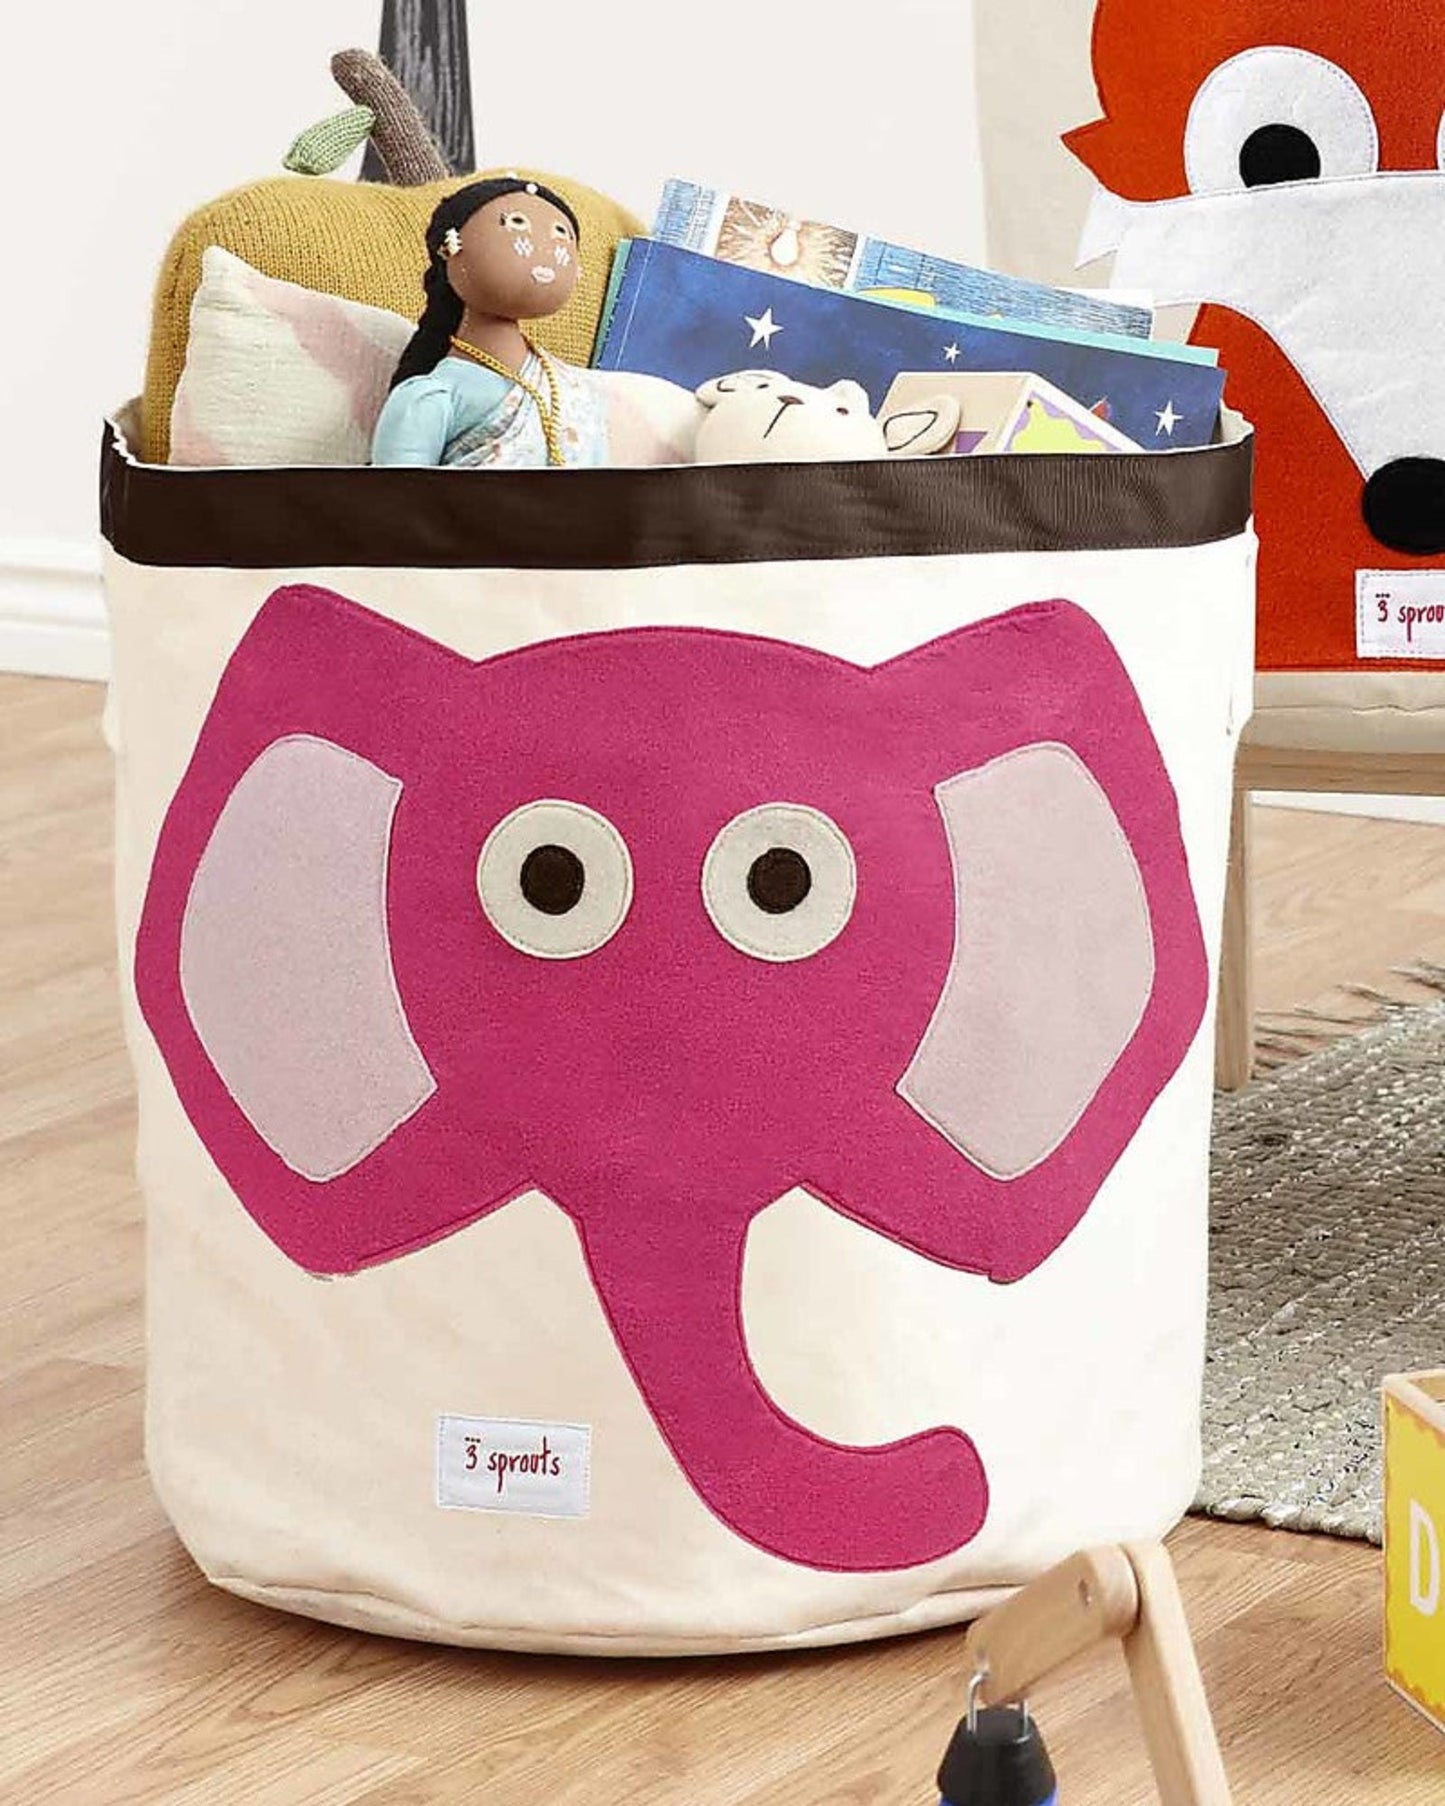 3 Sprouts Children's Storage Bin - Elephant (Pink) 3 Sprouts 39.95